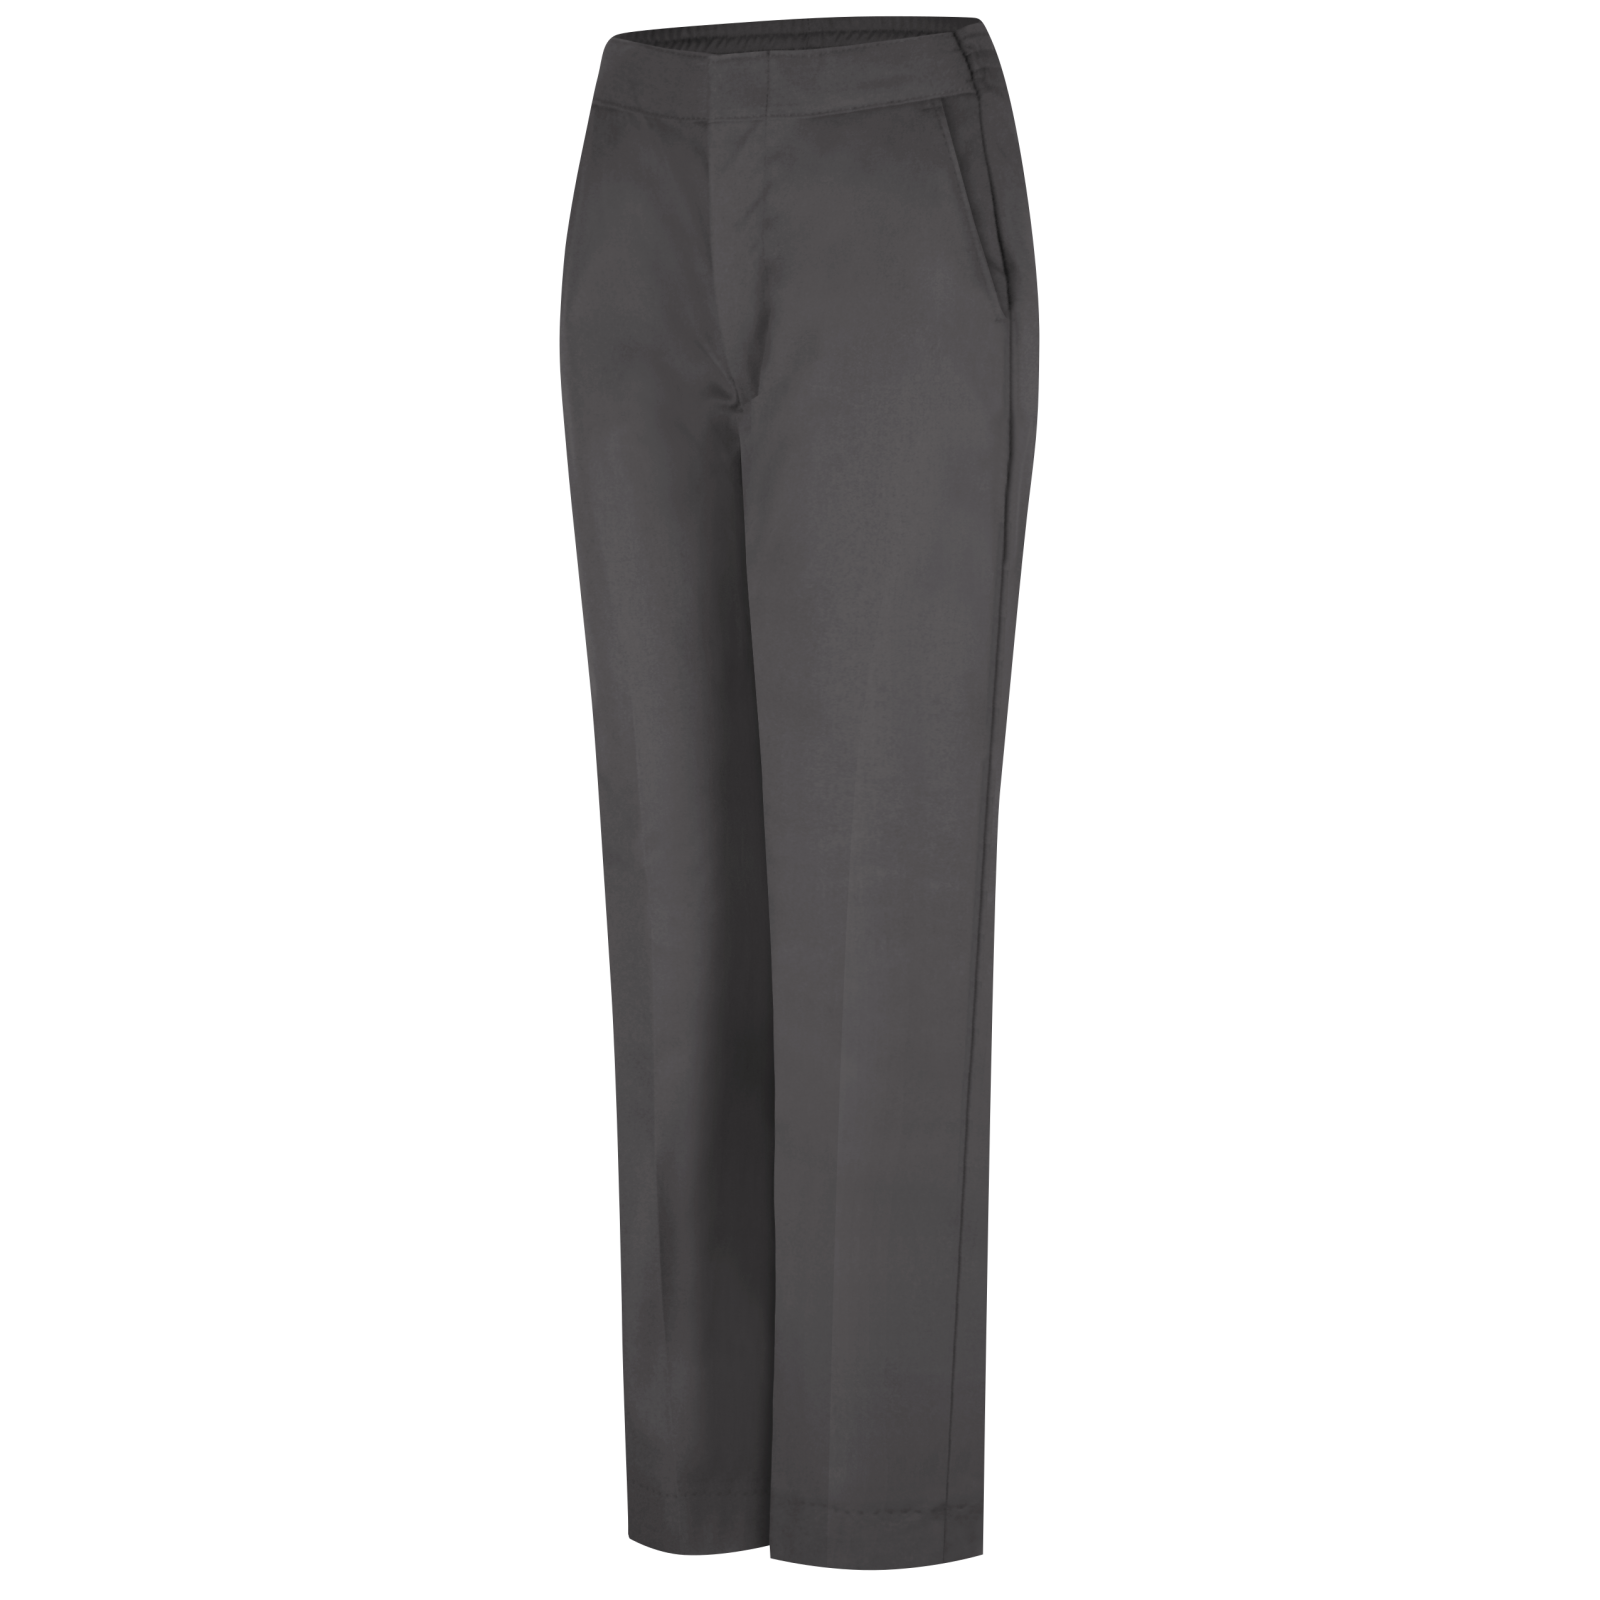 Womens Black And Grey Skinny Office Dress Pants For Autumn And Spring  Business And Casual Wear Slim Fit Work Office Trousers For Ladies 211006  From Kong01, $23.44 | DHgate.Com